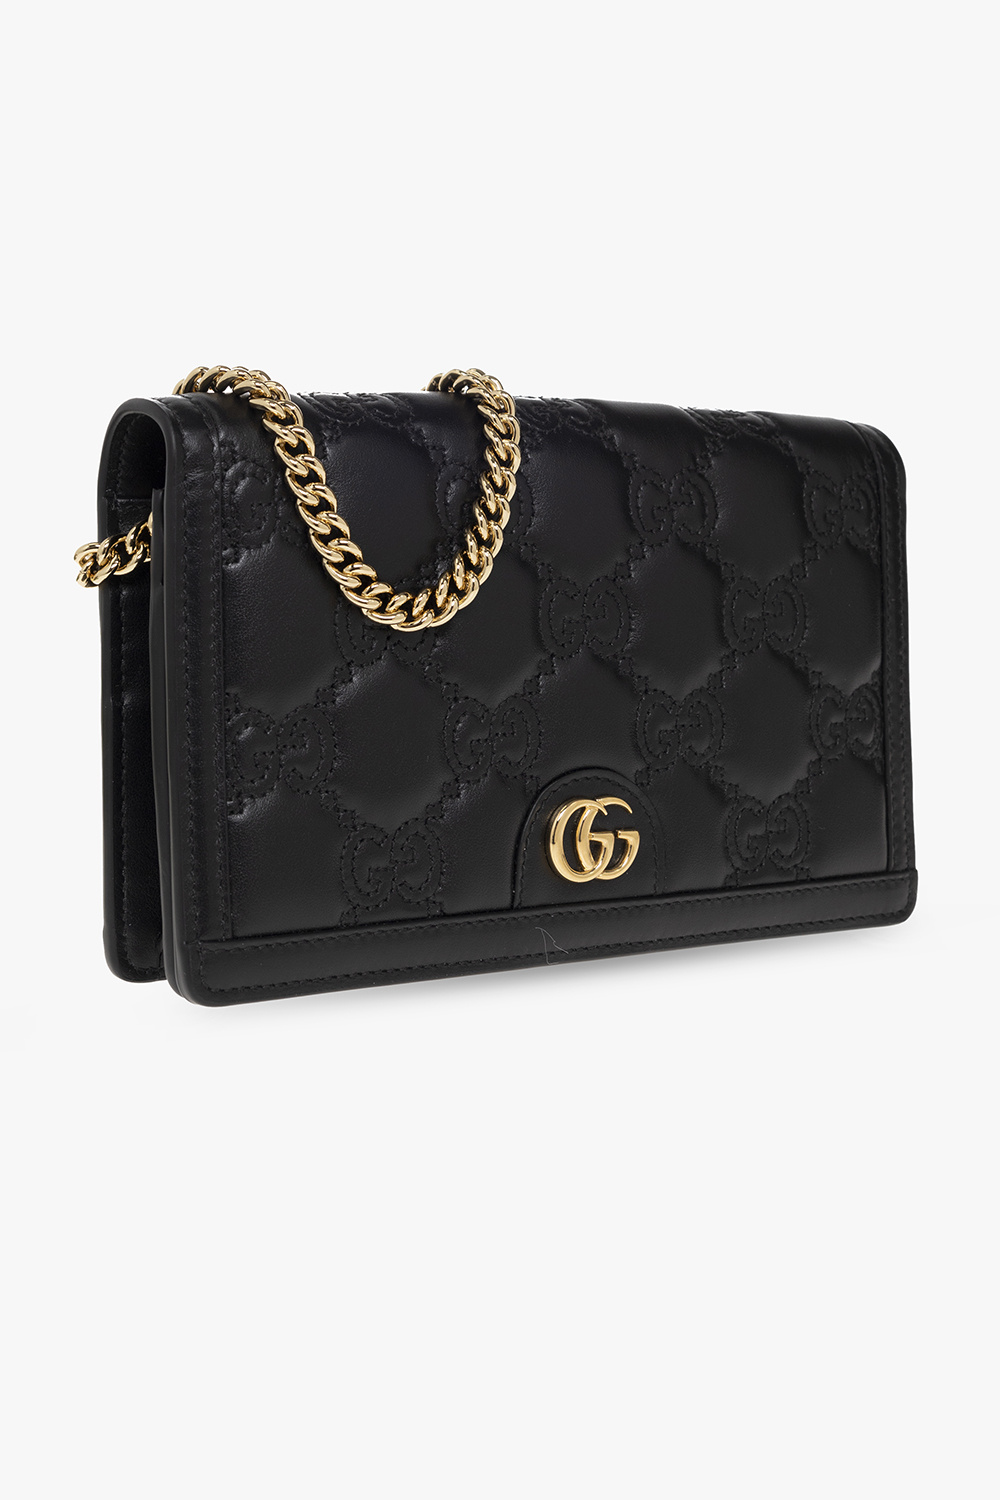 Gucci Leather wallet with chain